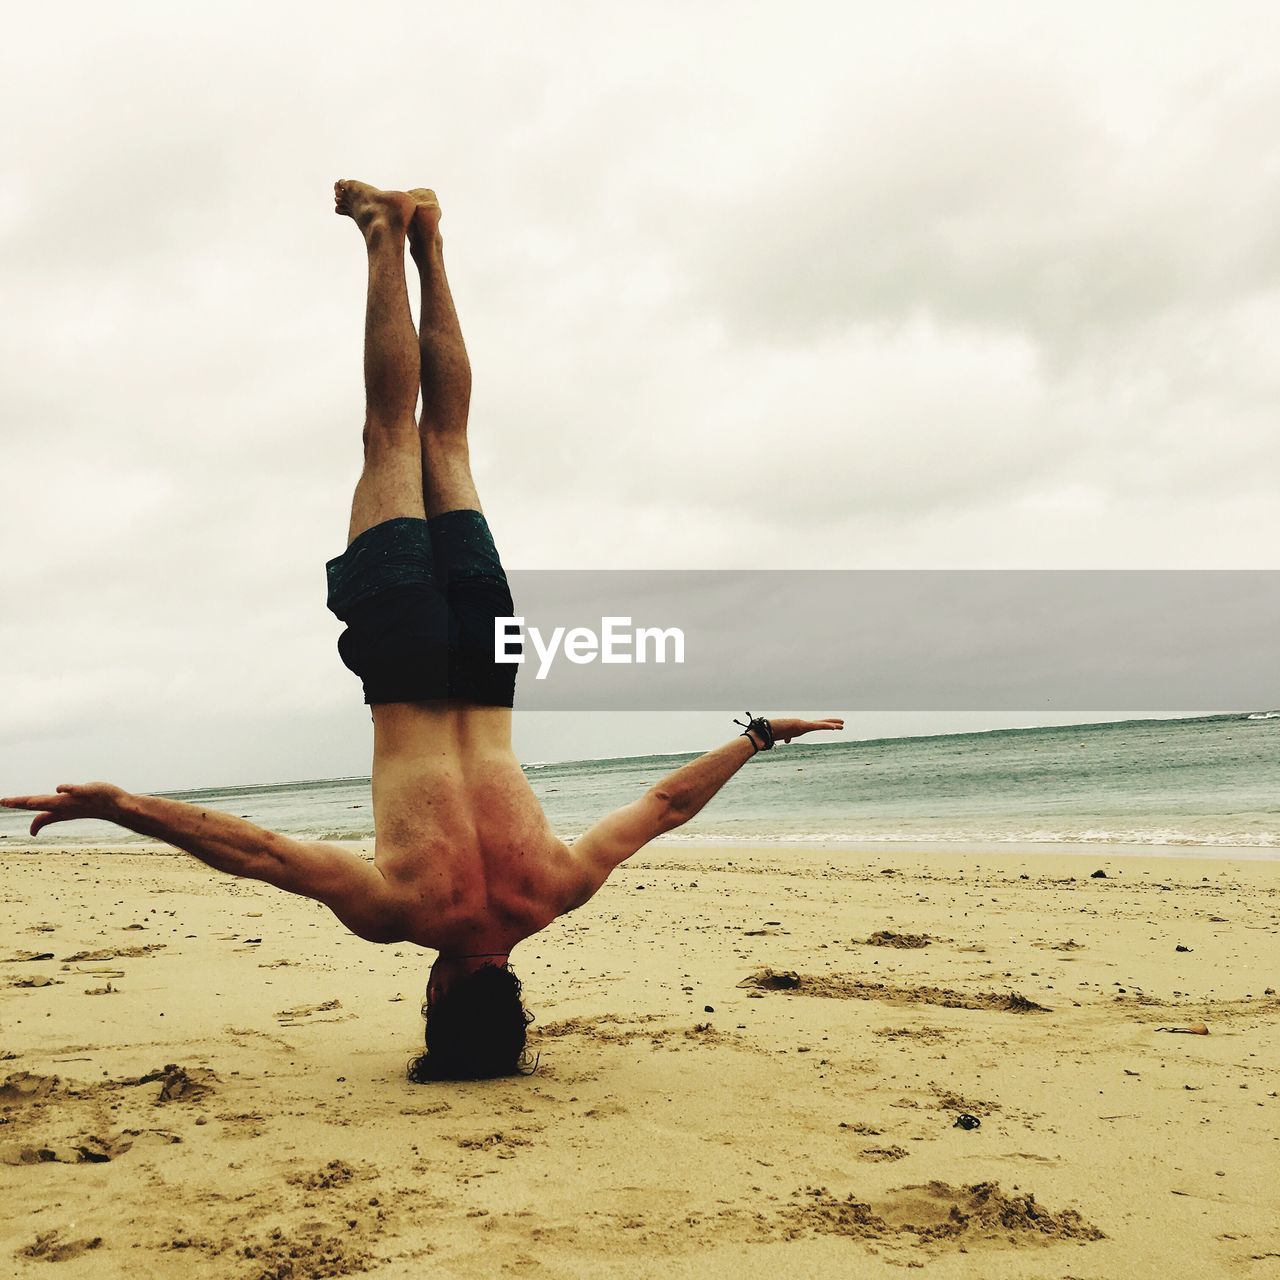 Shirtless man doing headstand at beach against cloudy sky